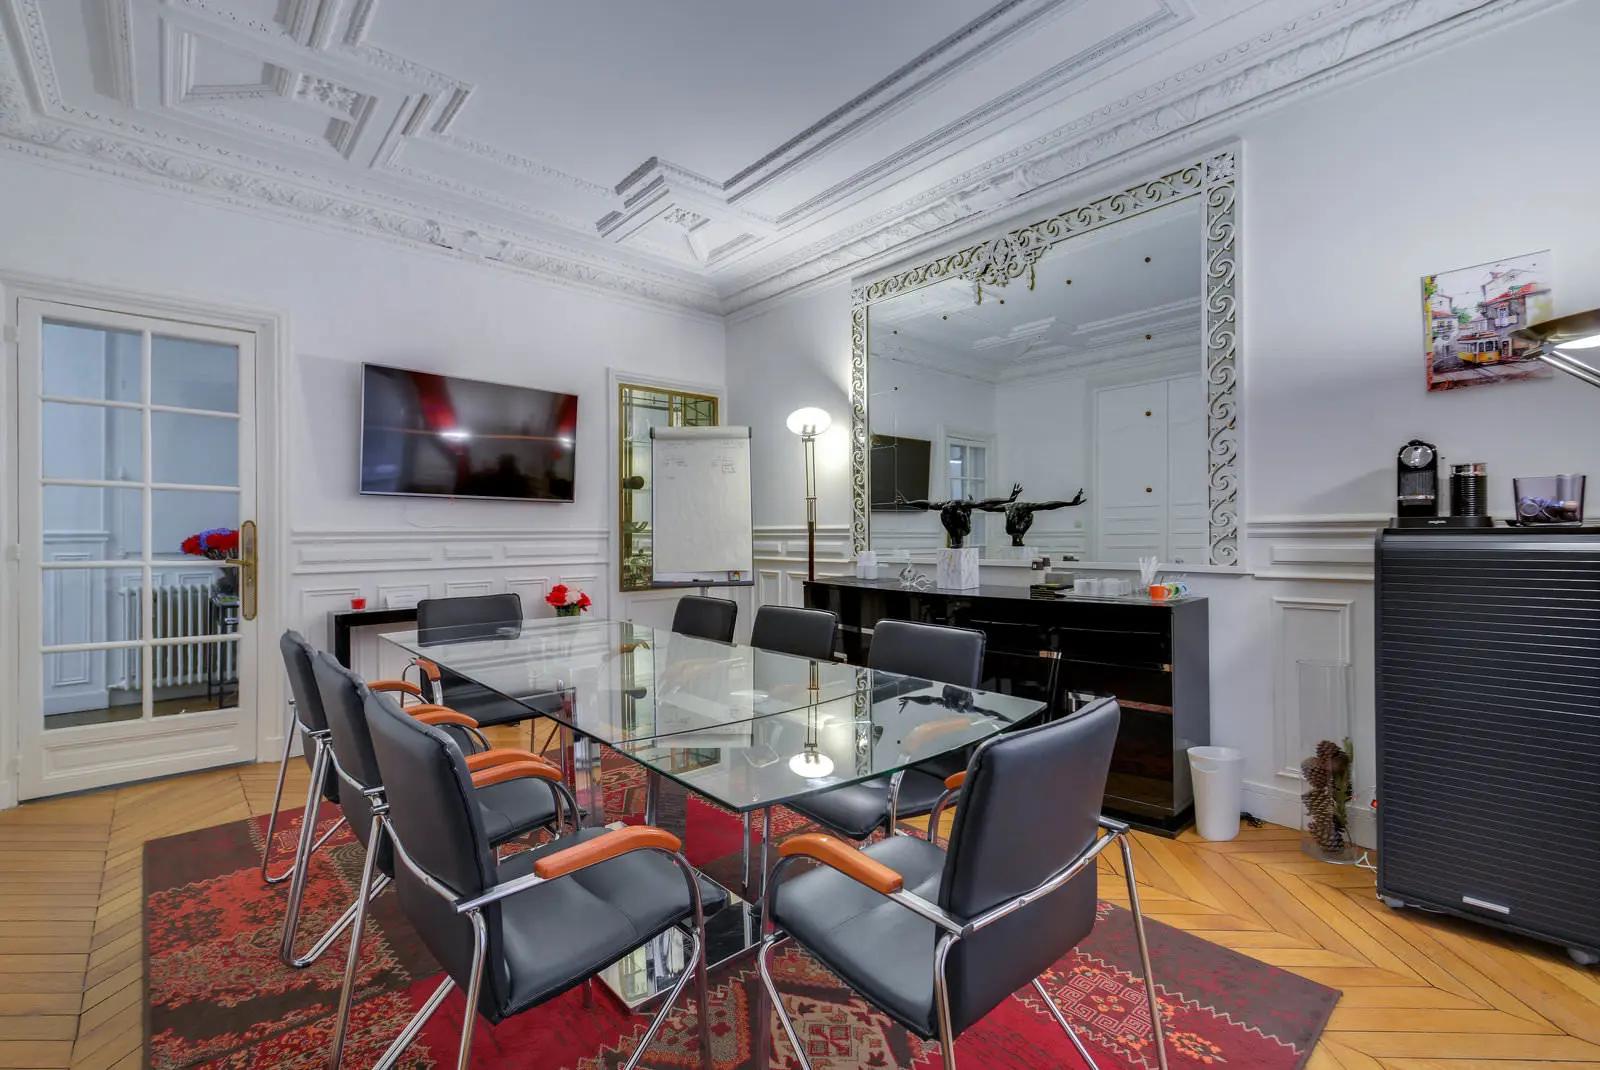 Meeting room in Law firm, Haussmann apartment - 1